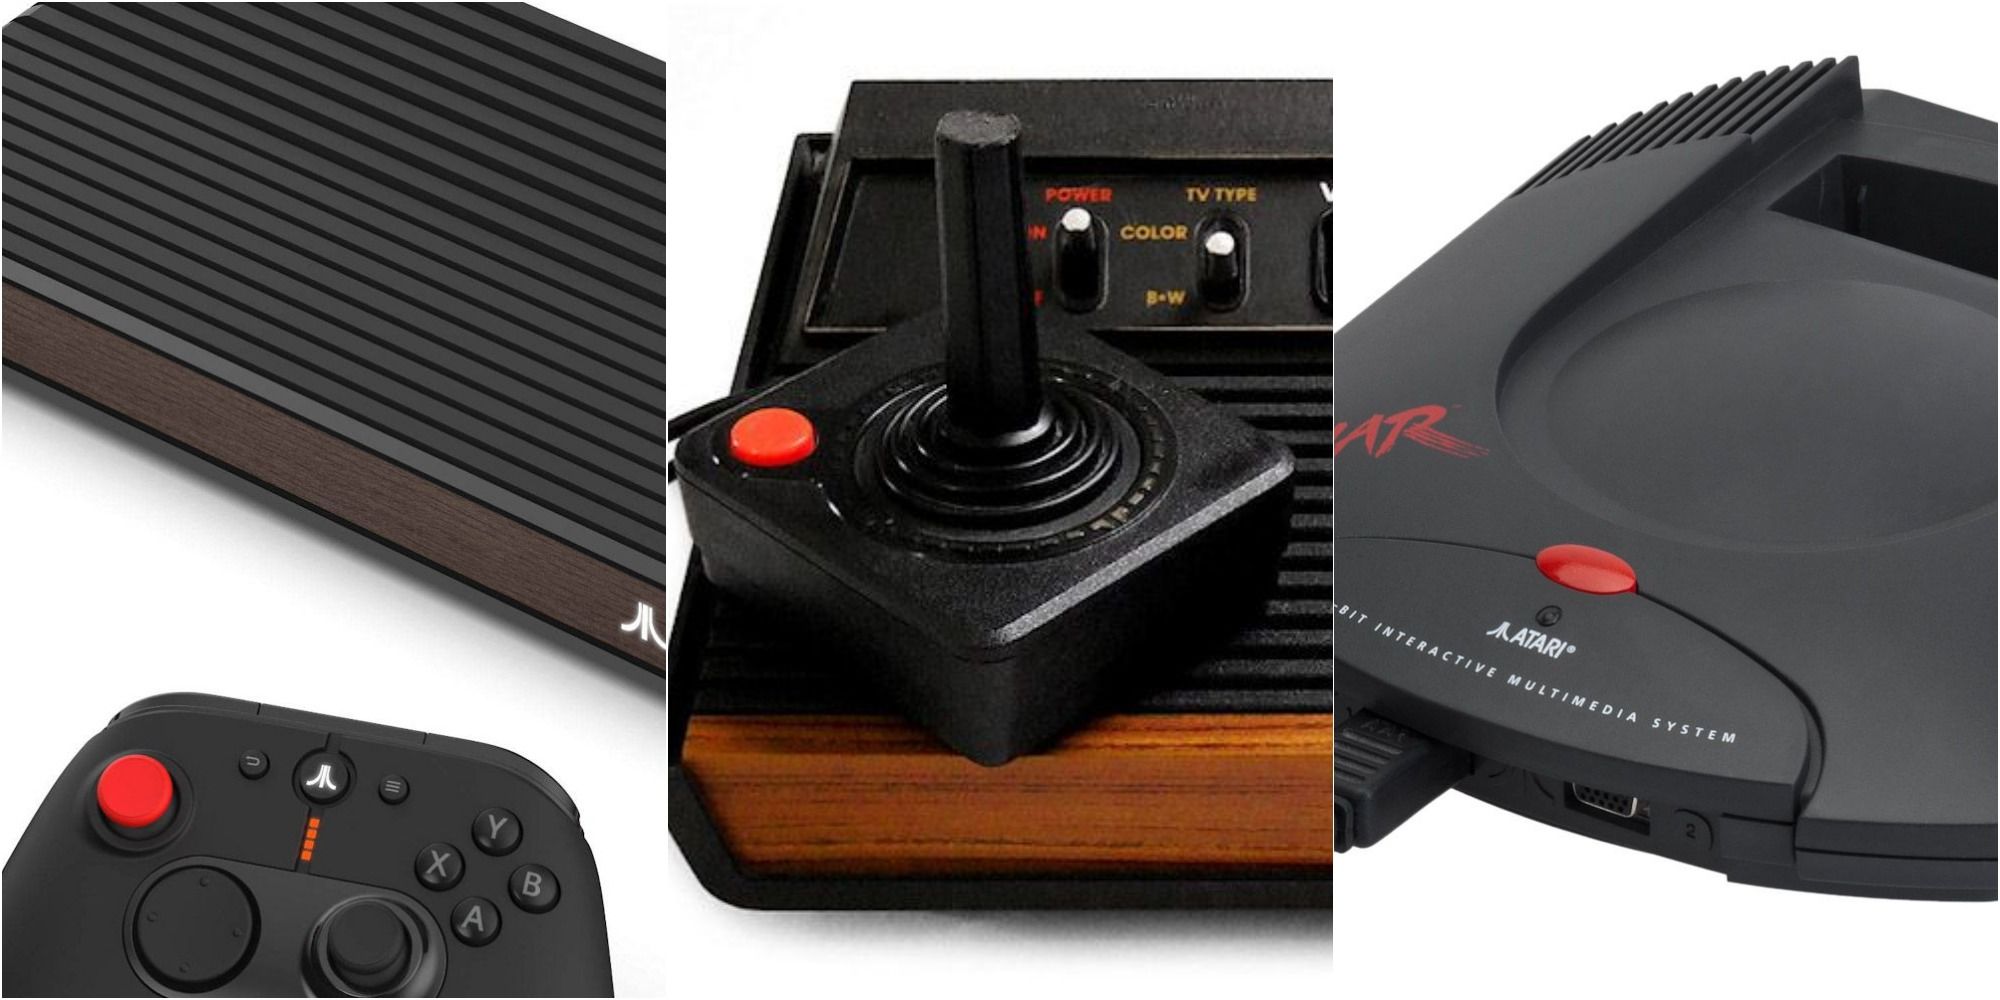 I recently just got 4 Atari 2600 consoles. Each one is just a